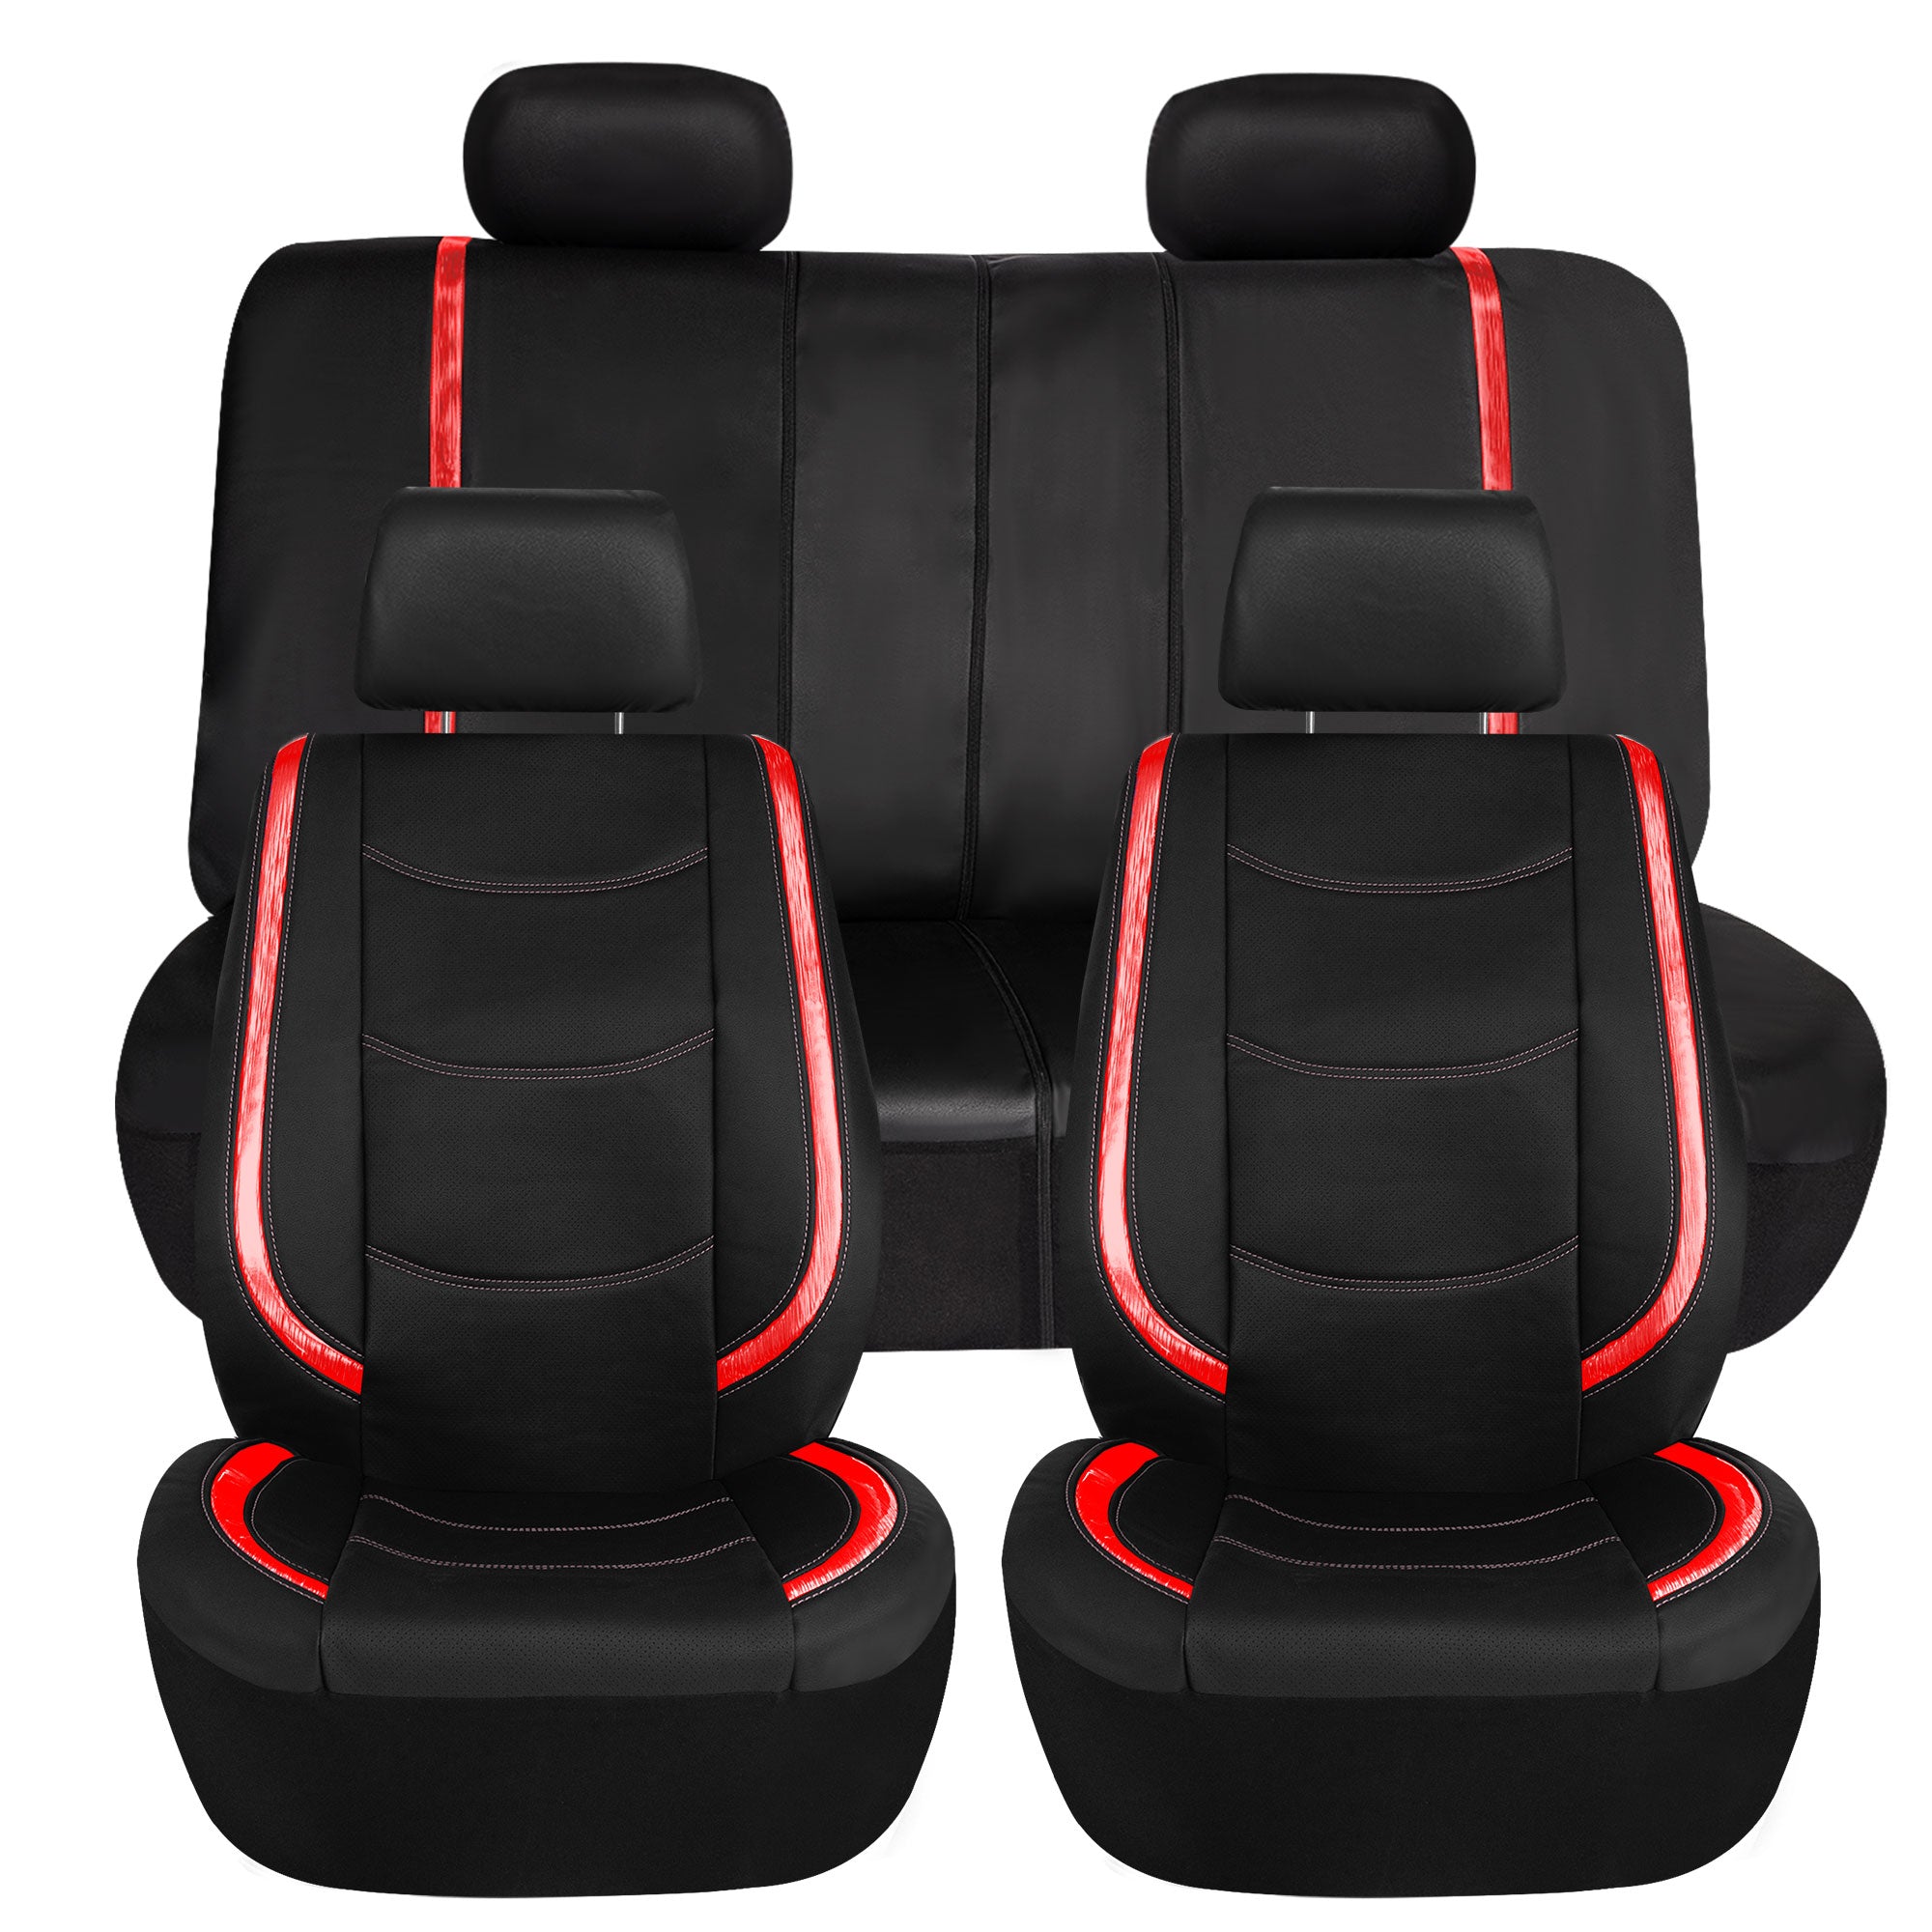 Galaxy13 Metallic Striped Deluxe Leatherette Seat Covers - Full Set Red